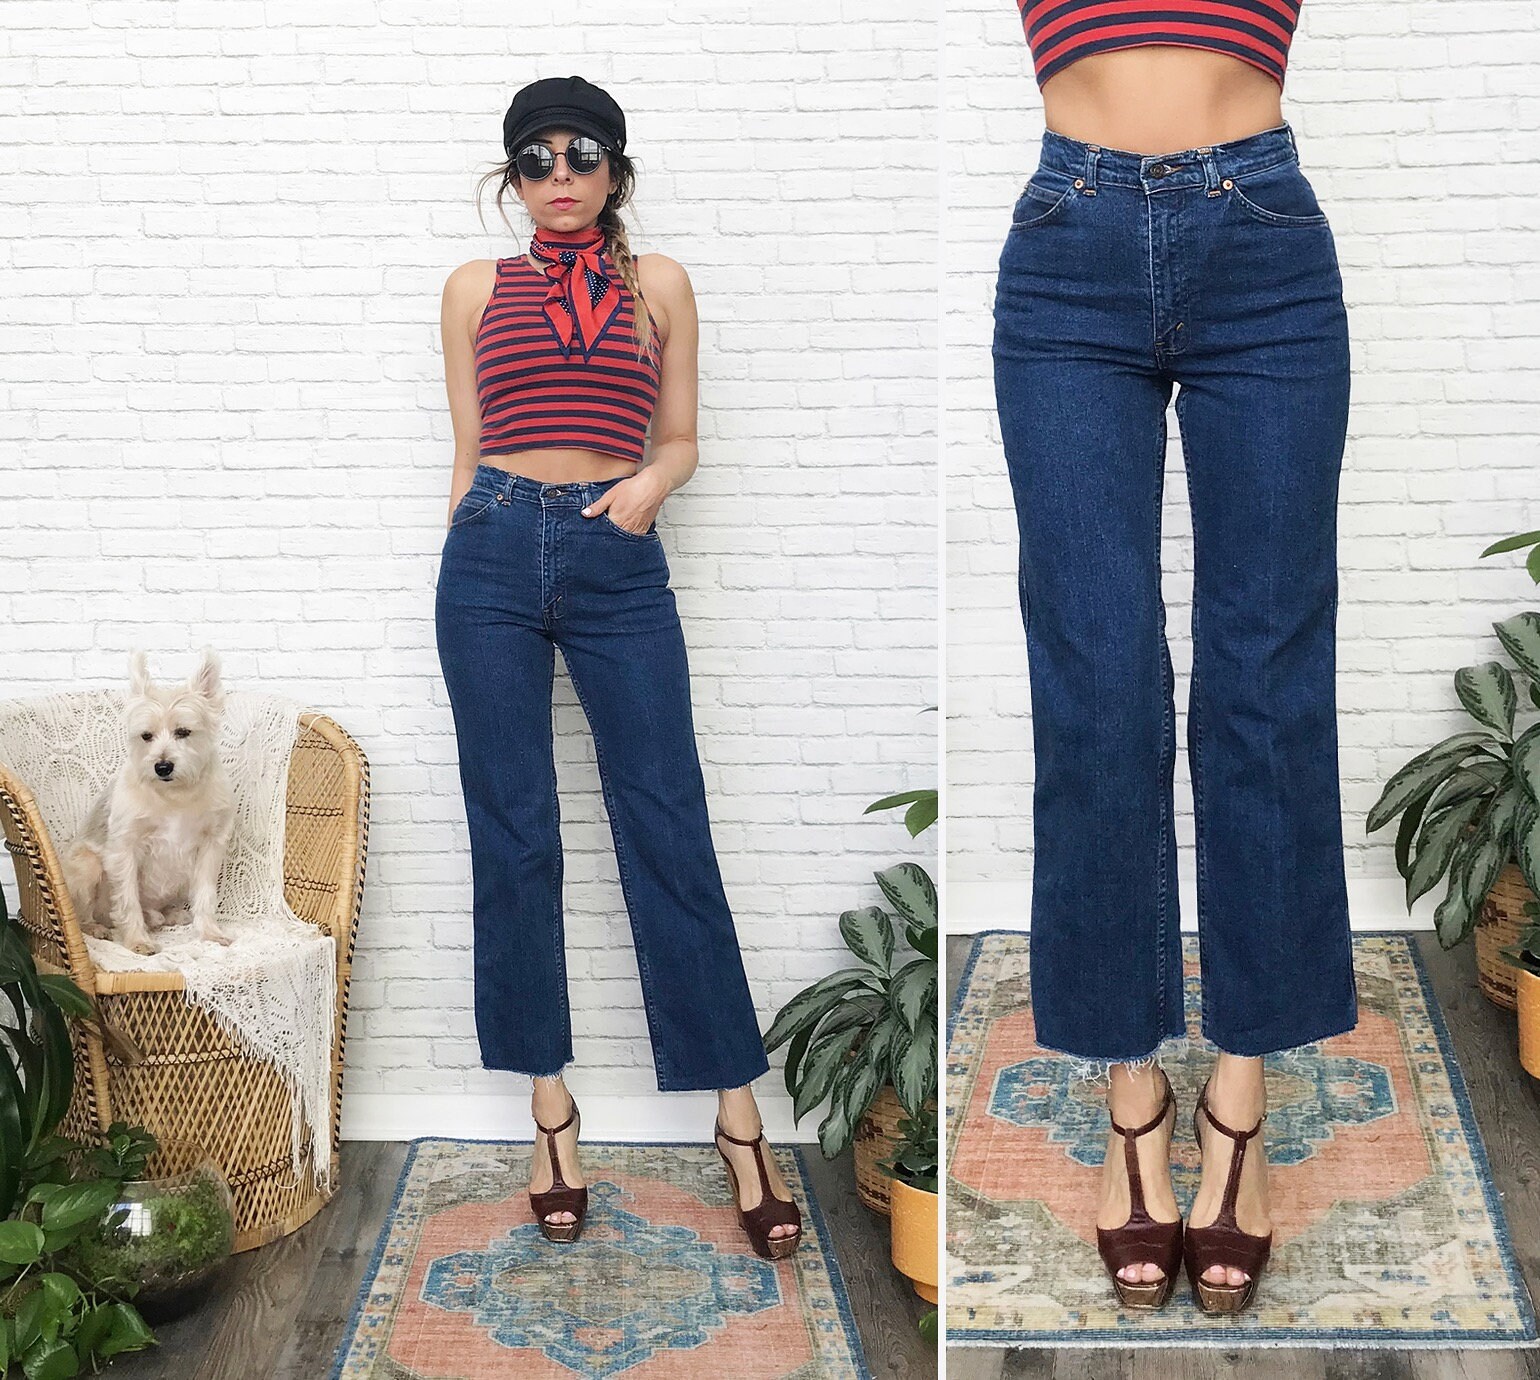 Vintage 1970s LEVIS Rare Kick Flare 917 Jeans Size 26 to - Etsy